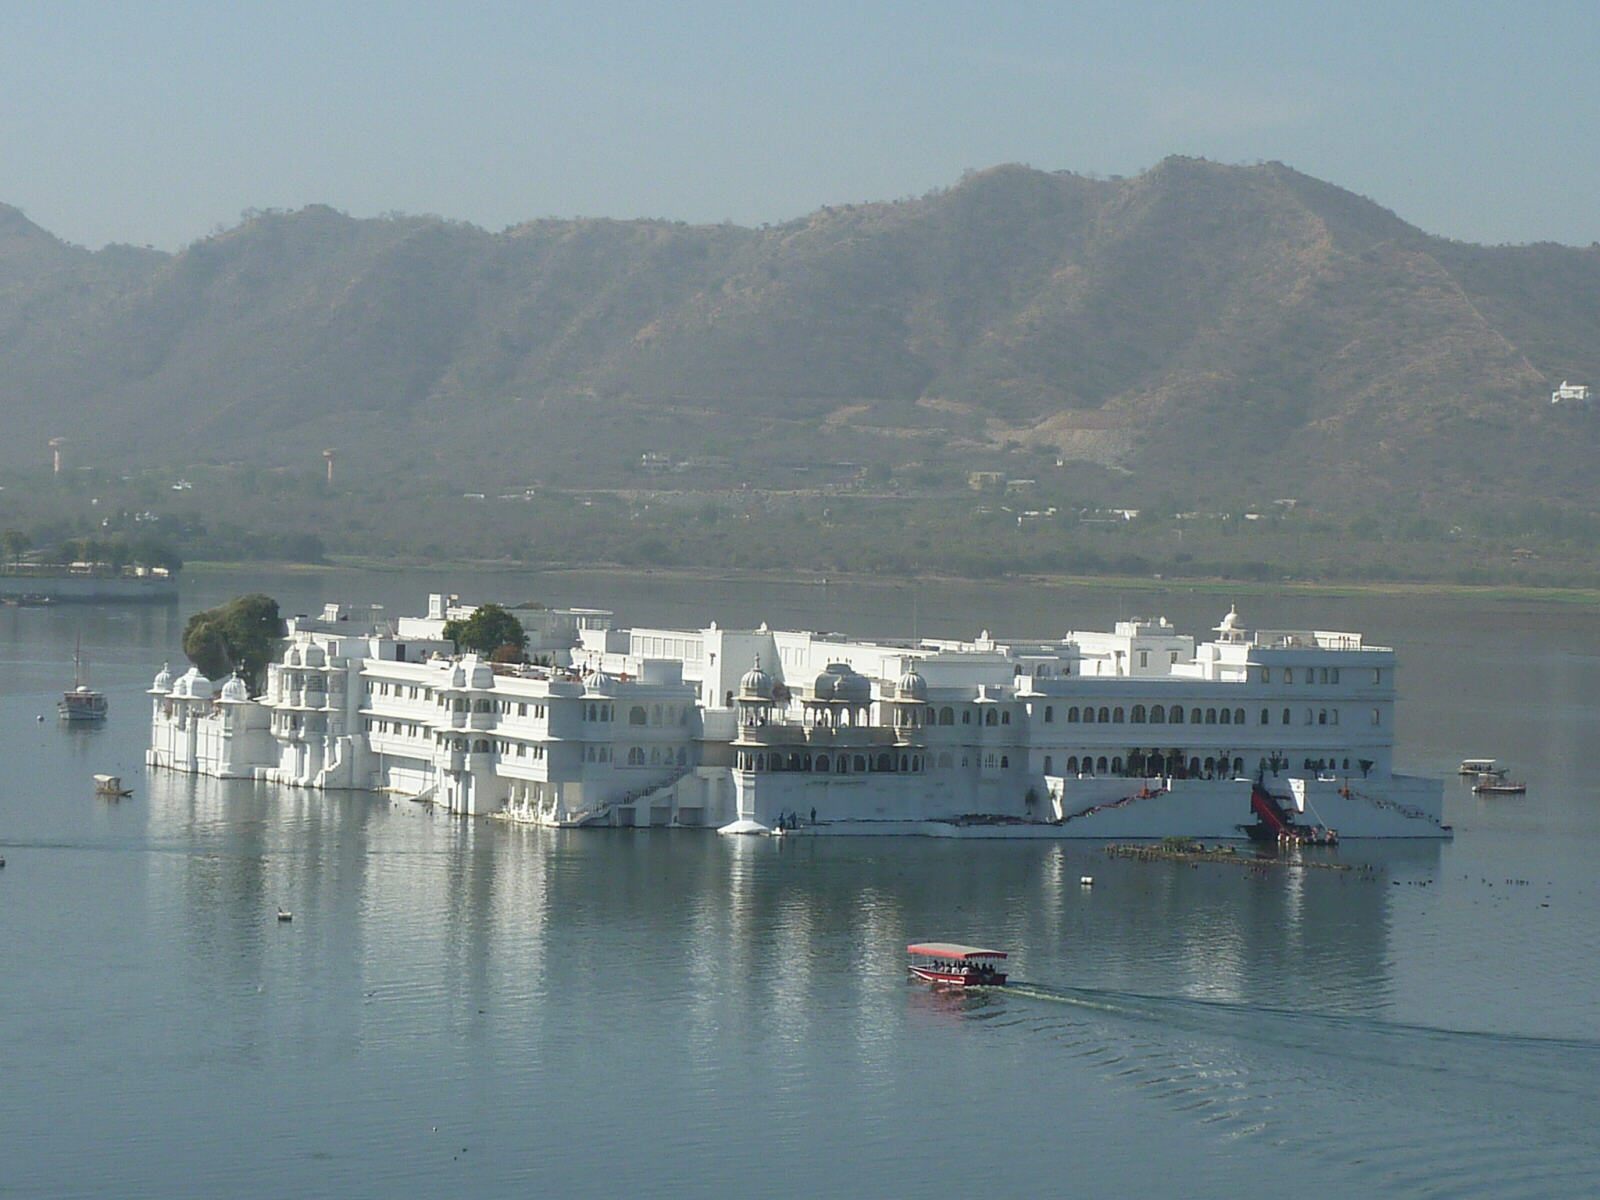 The exclusive Lake Palace hotel in Udaipur, Rajasthan